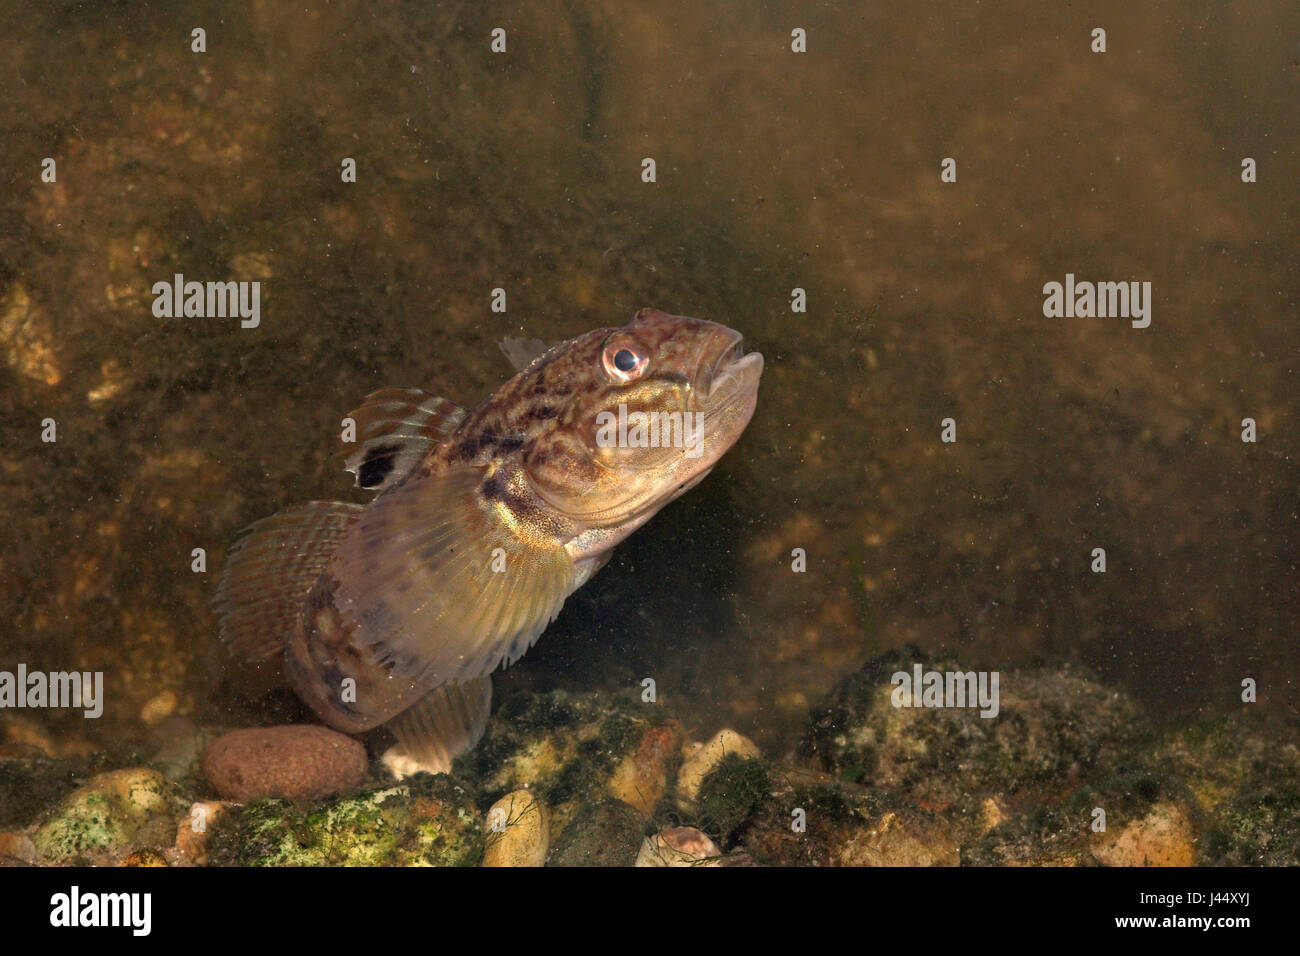 Round goby swimming between rocks Stock Photo